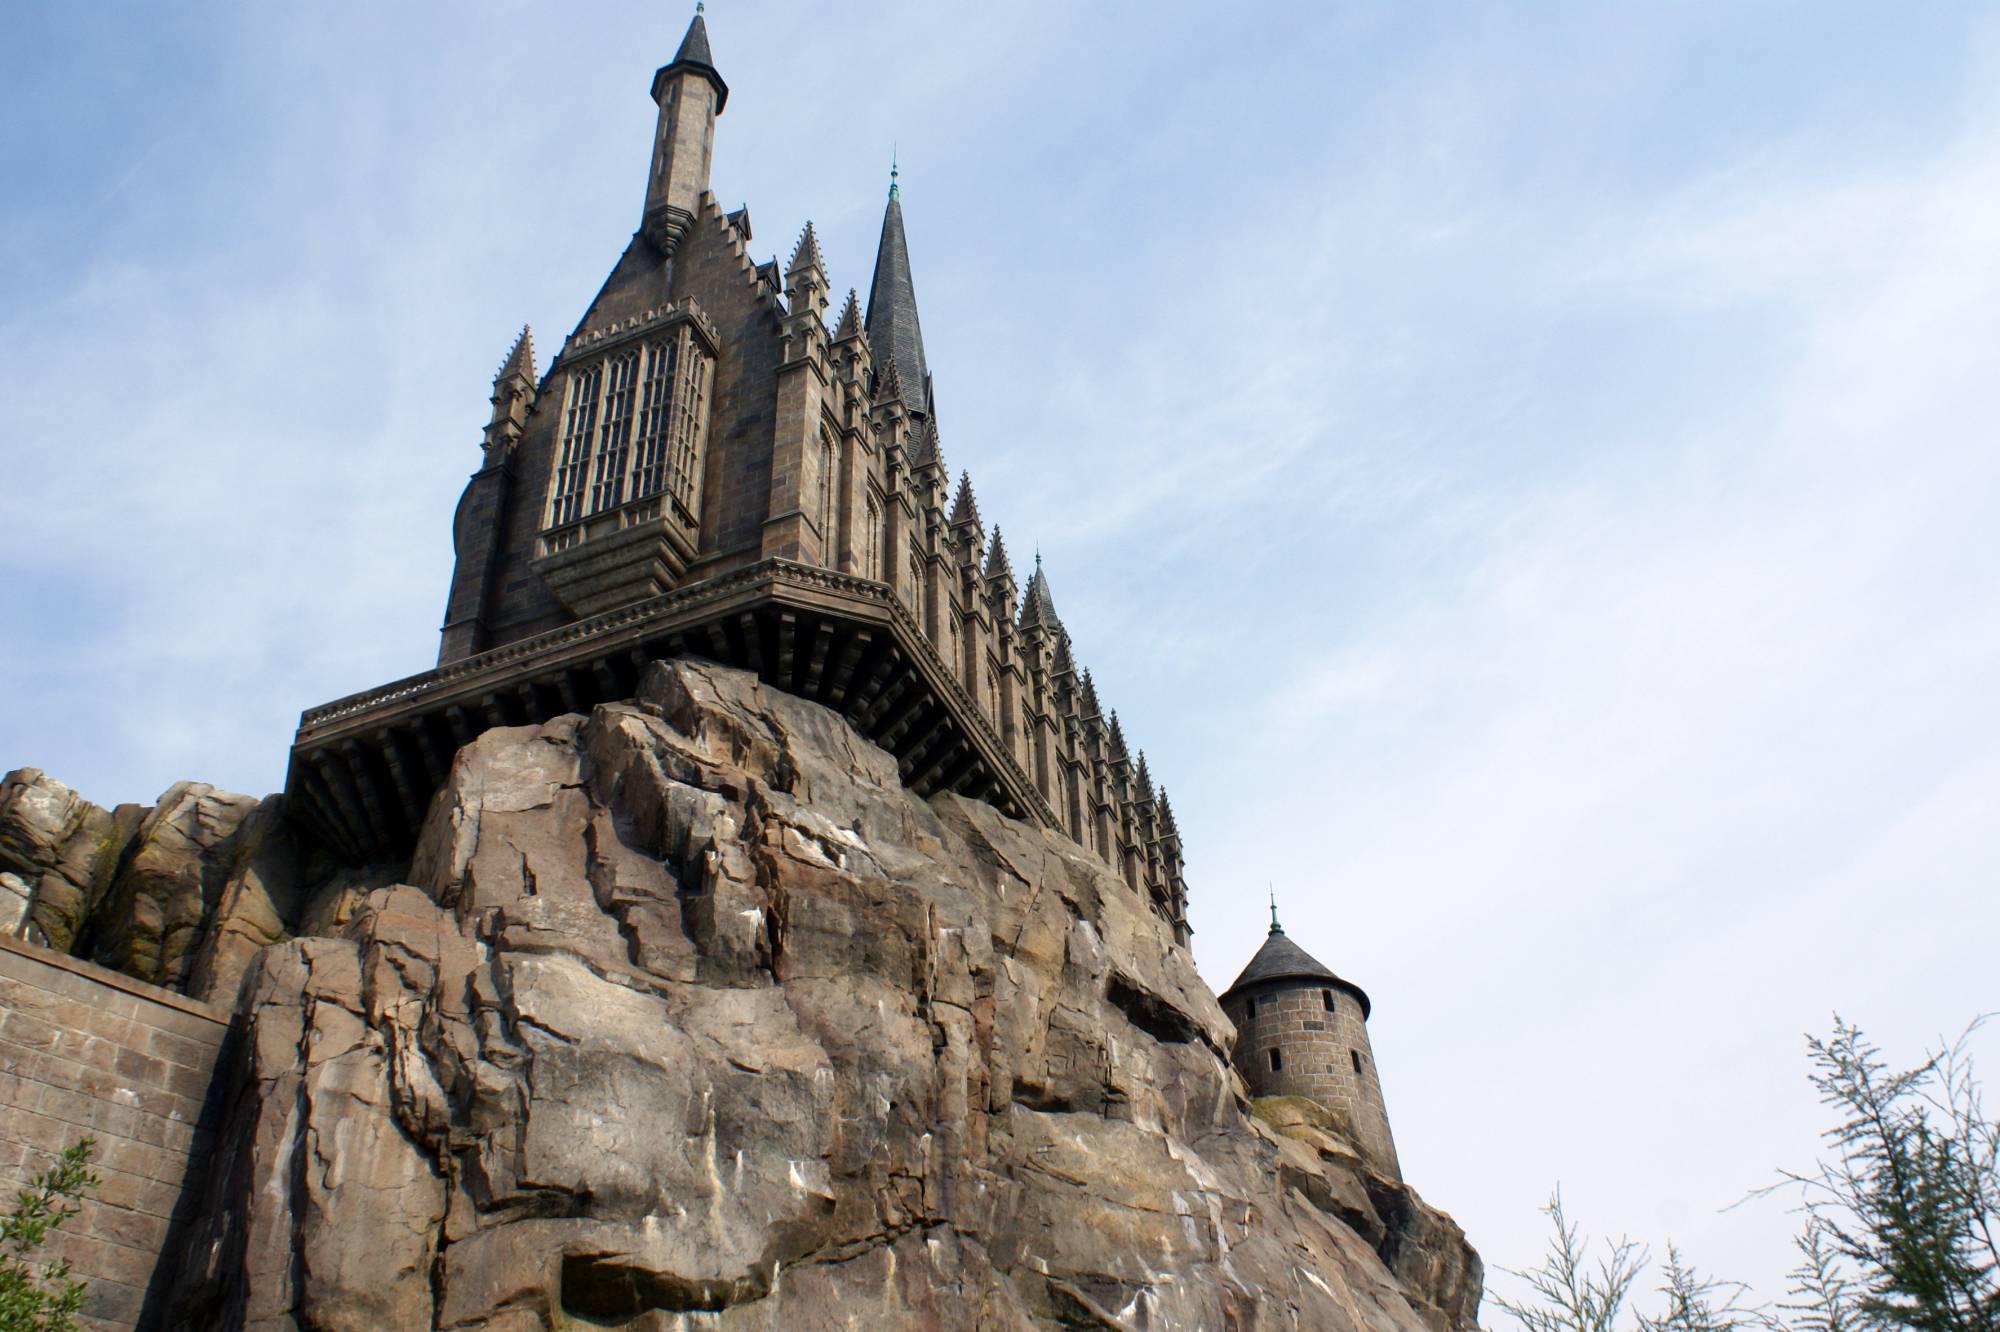 Hogwarts Castle from Another Angle